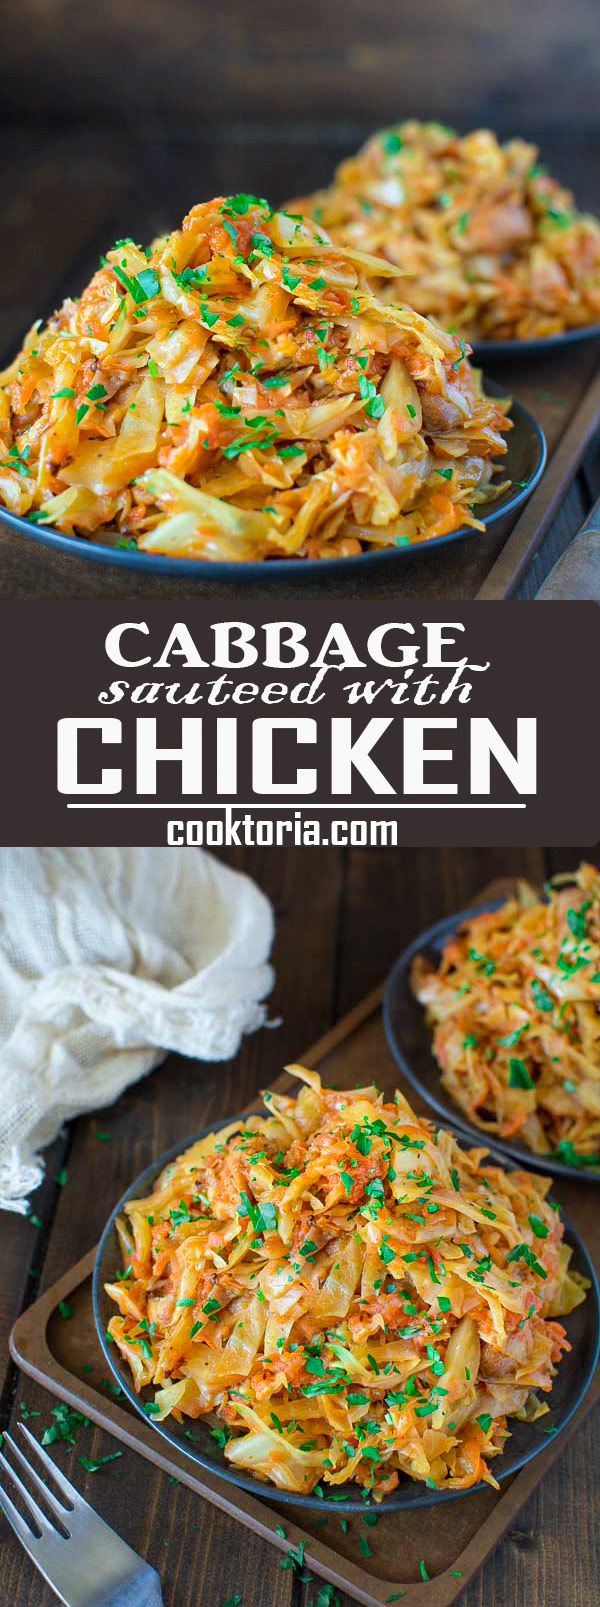 Succulent cabbage sauteed with tender chicken and vegetables. All you need is just a few ingredients and about 15 minutes of time to make this delicious dinner ready.